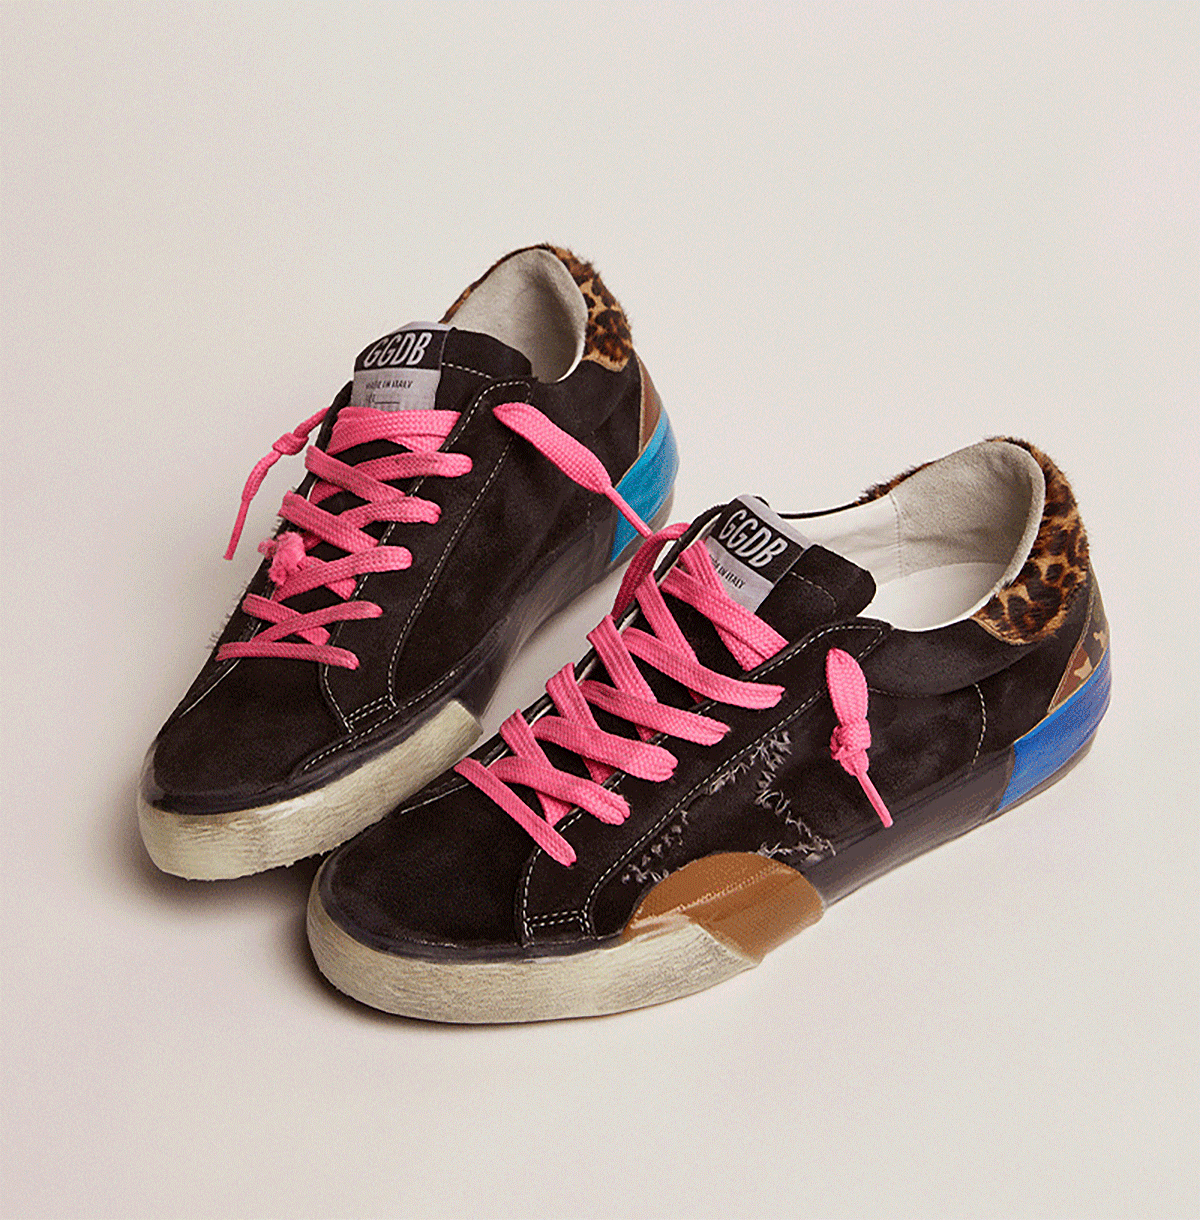 Golden Goose: App Exclusive: Limited Edition Super-Star LAB | Milled